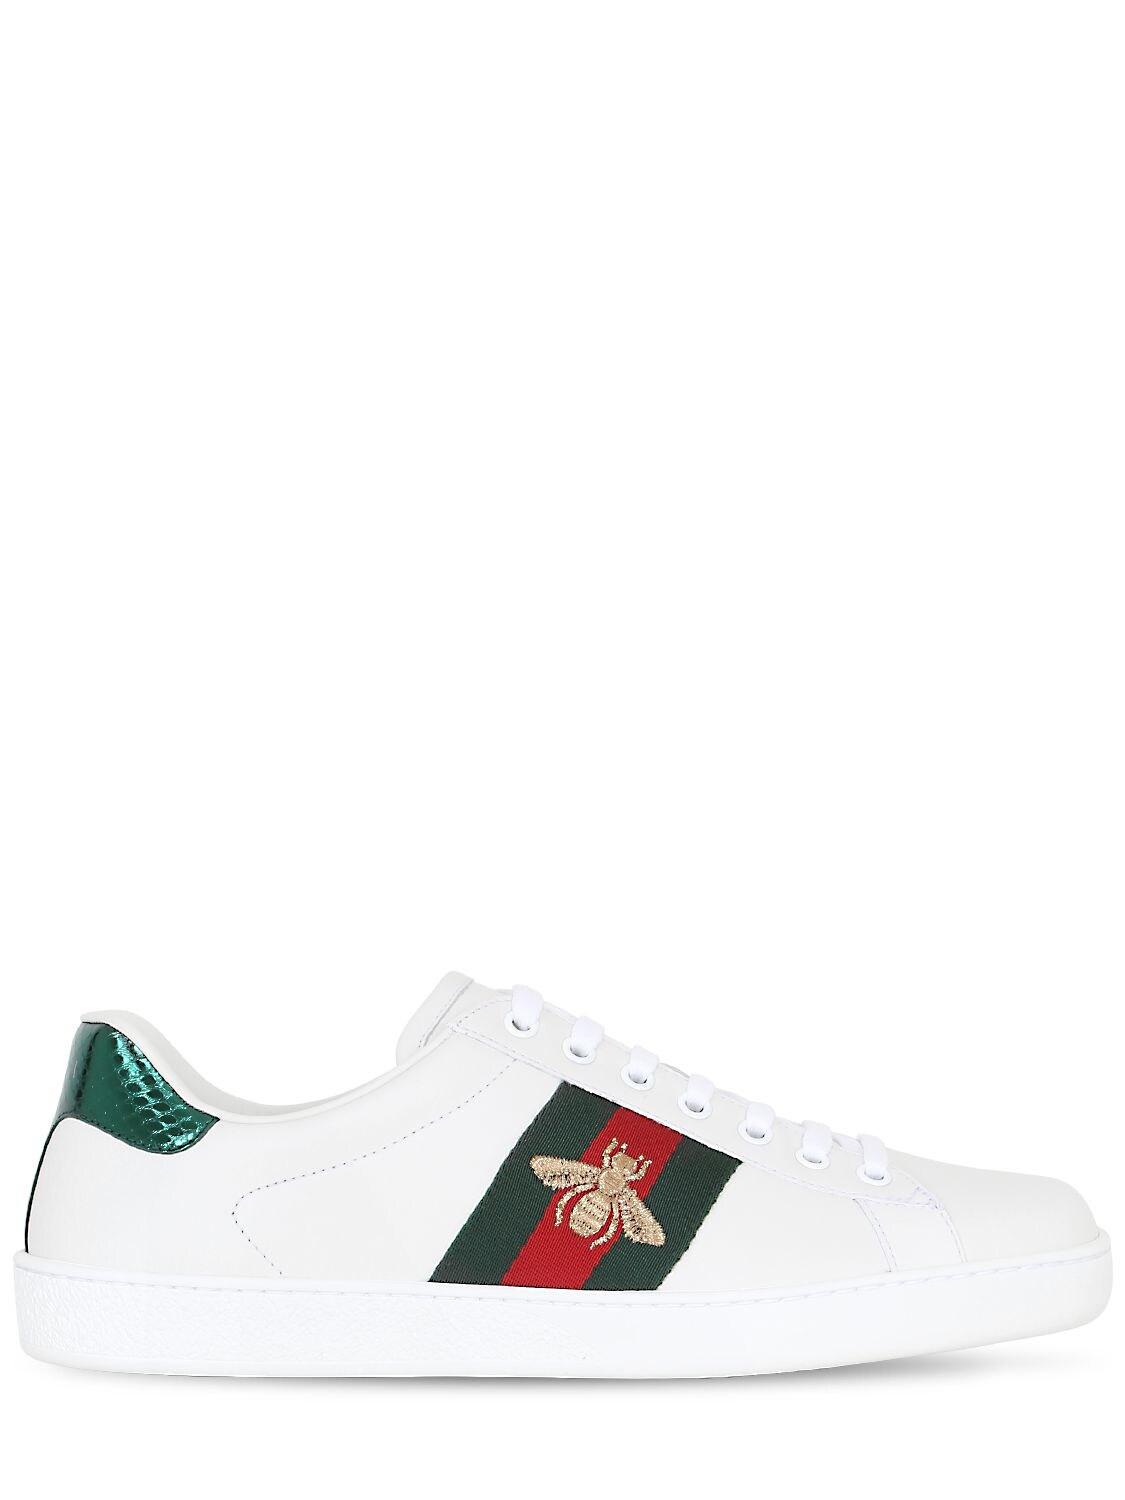 Gucci Ace Embroidered Tiger Leather Sneaker in White for Men - Save 45% -  Lyst